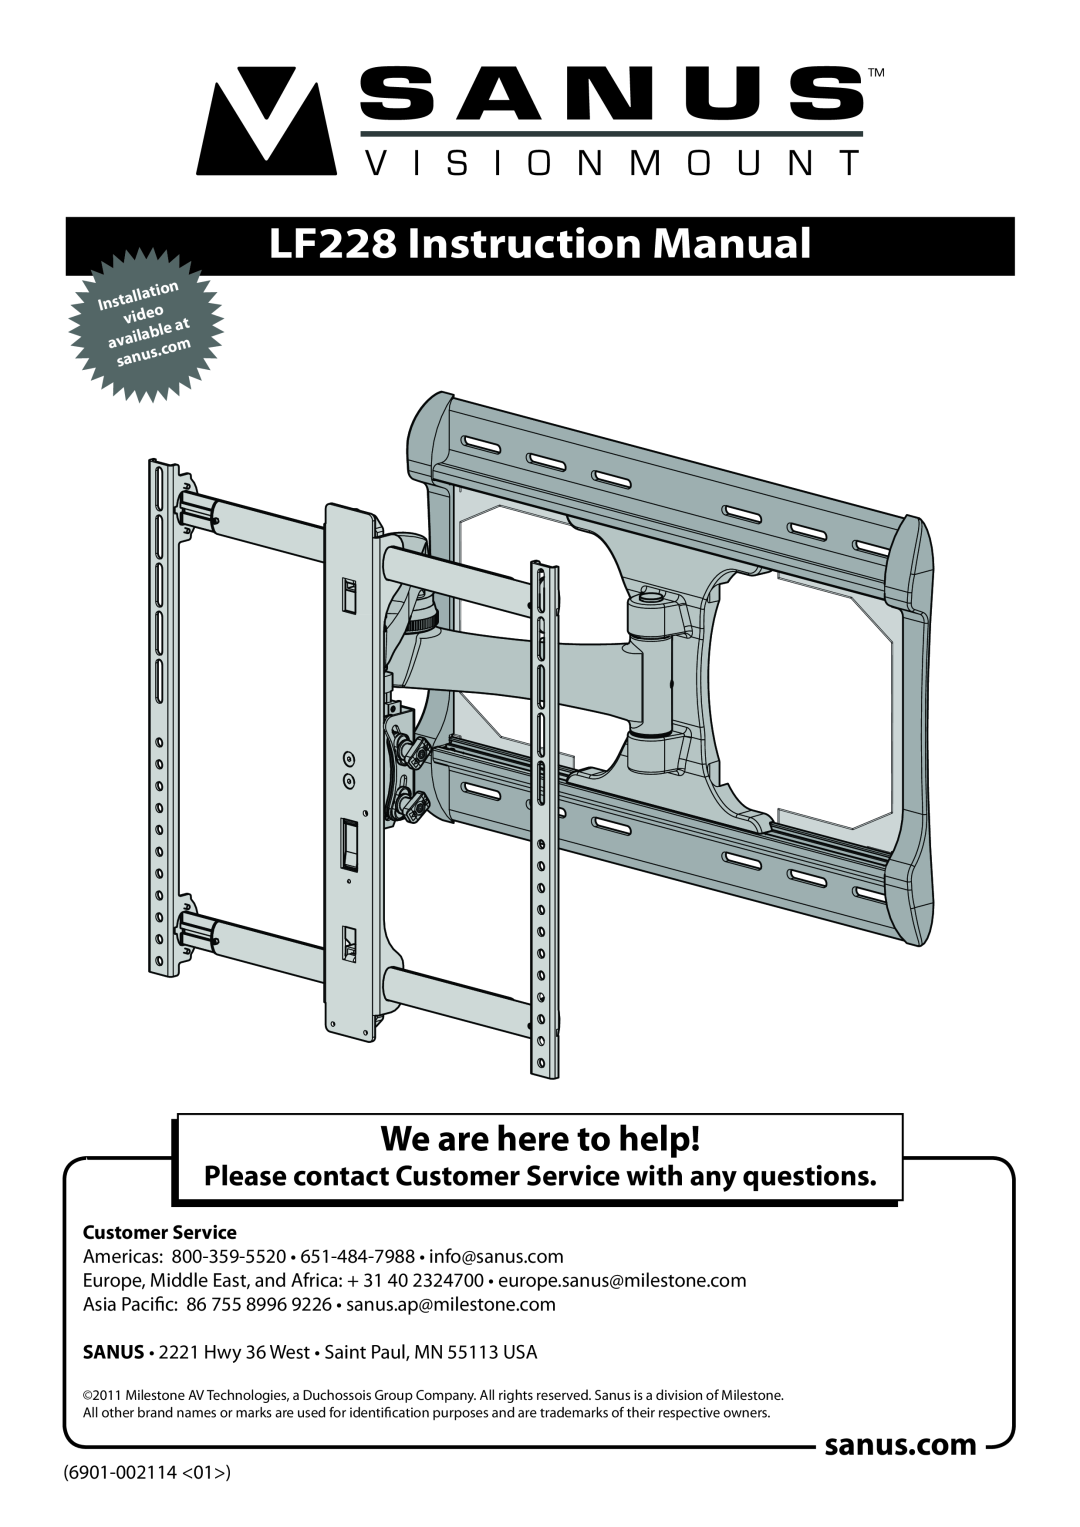 Sanus Systems instruction manual sanus.com, LF228 Instruction Manual, We are here to help 